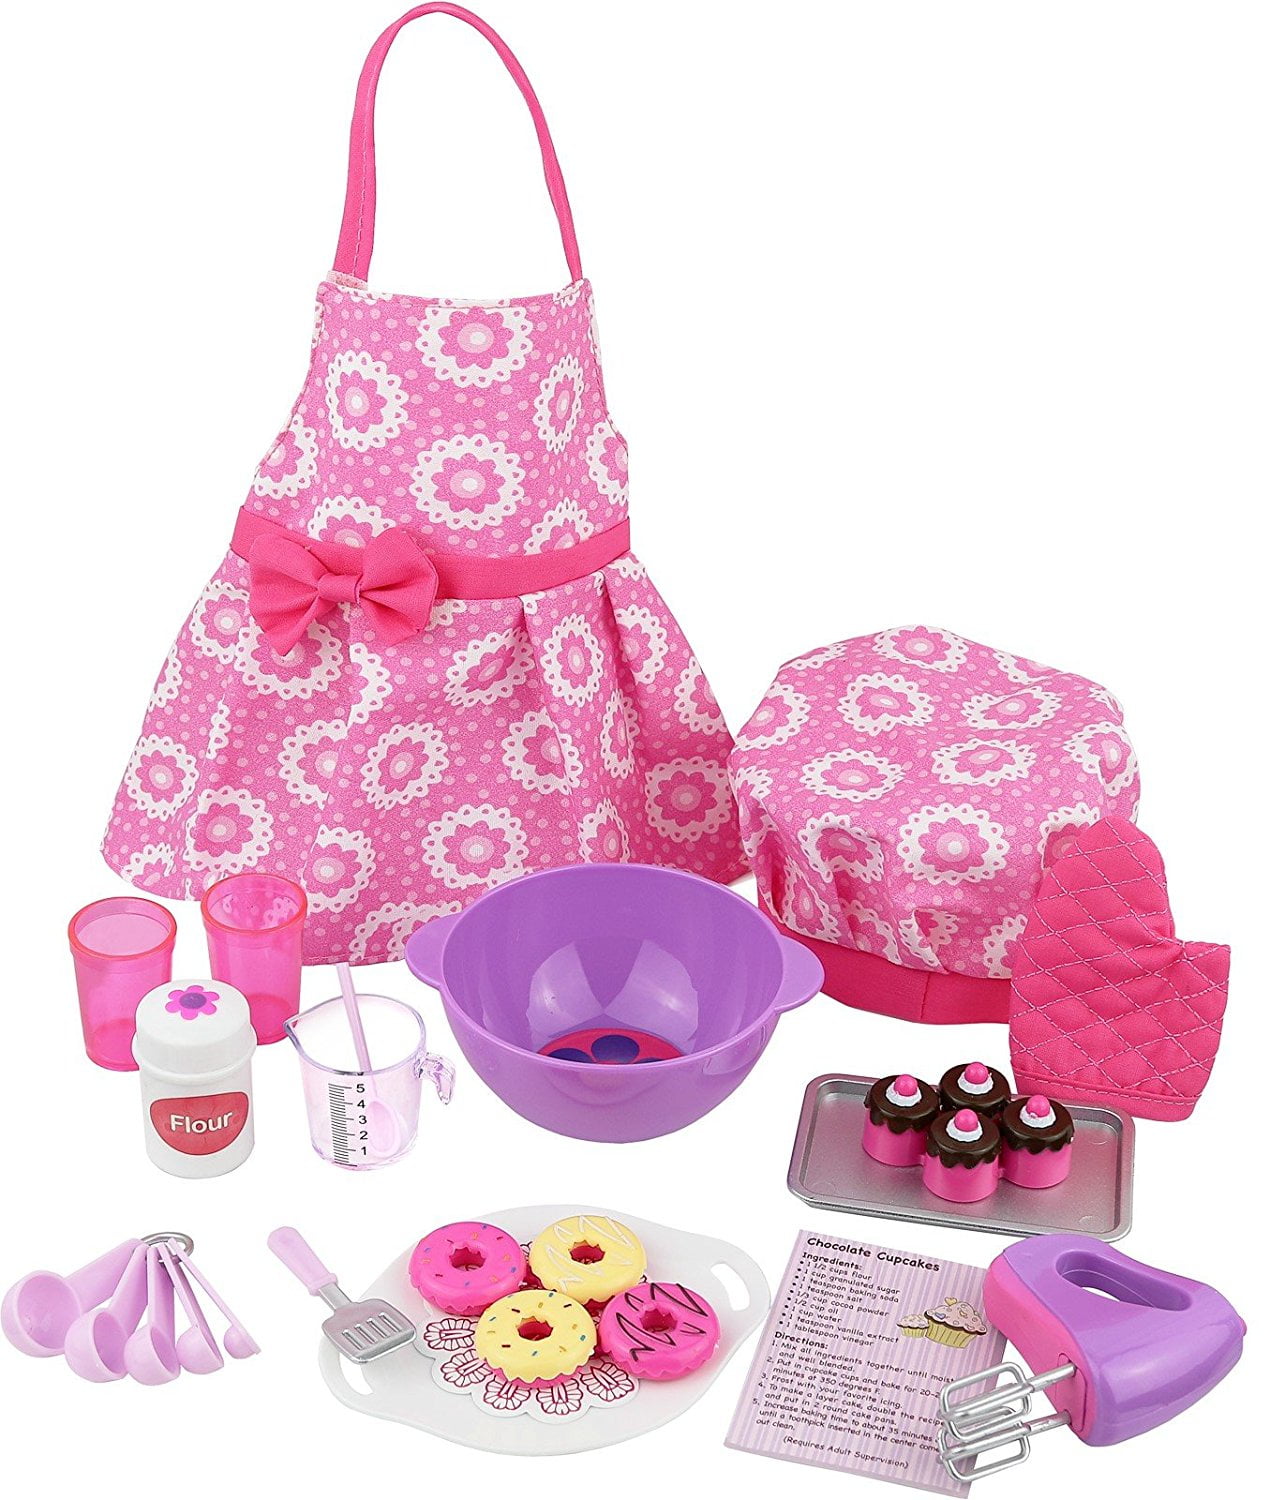 Beverly Hills 20 Piece Baking Set; Apron Oven Mitt and Utensils for 18 Inch Doll 